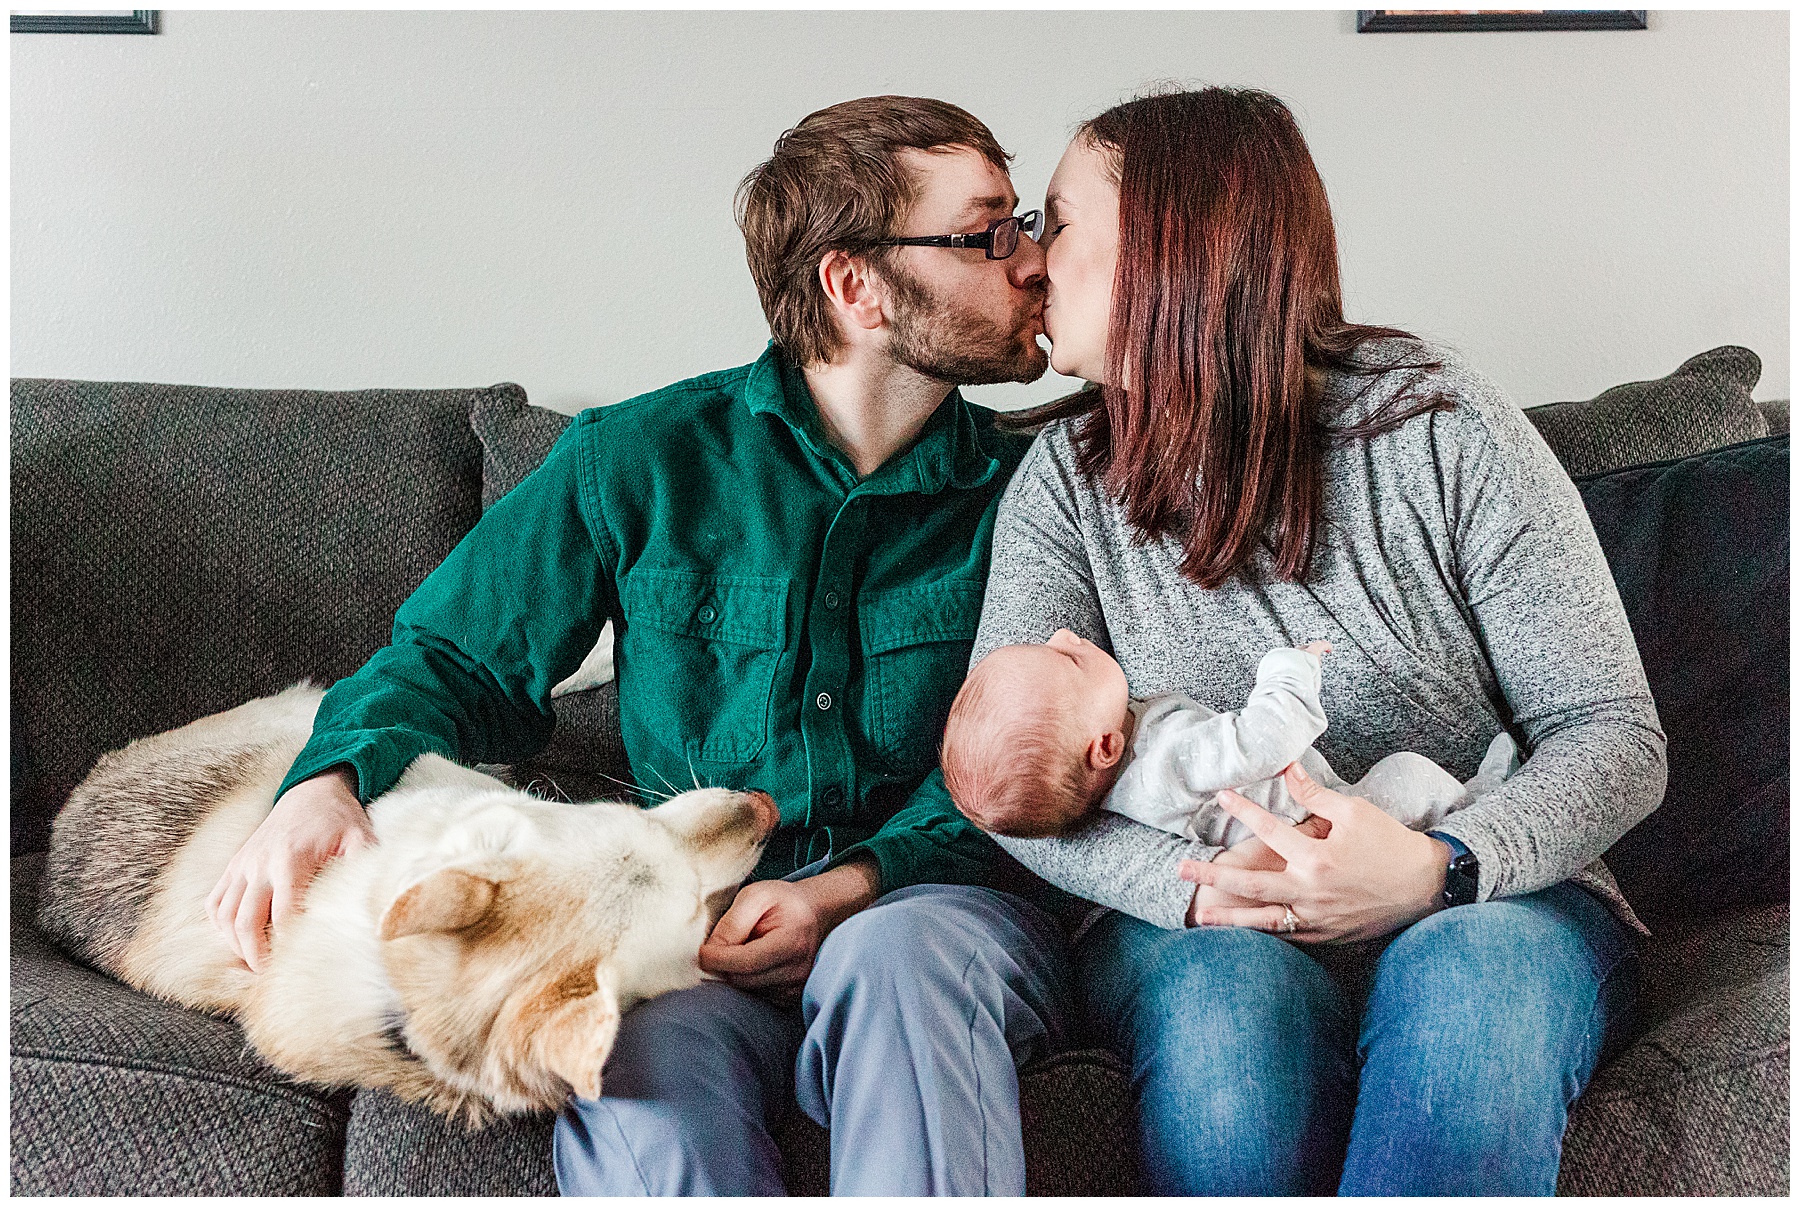 Parents kissing on couch with dog and newborn baby